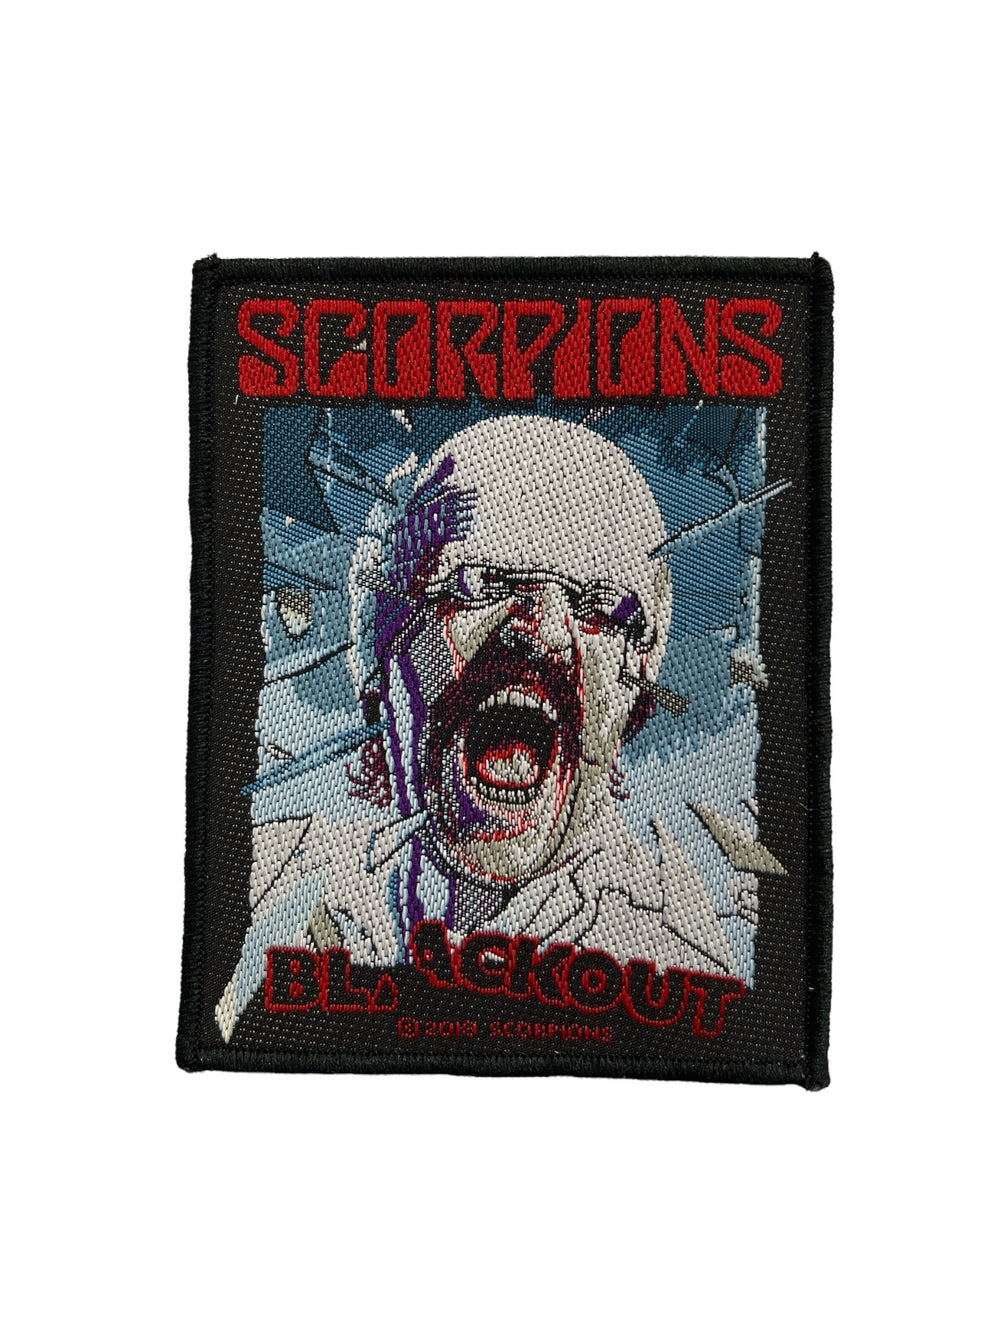 Scorpions The Blackout Official Woven Patch Brand New